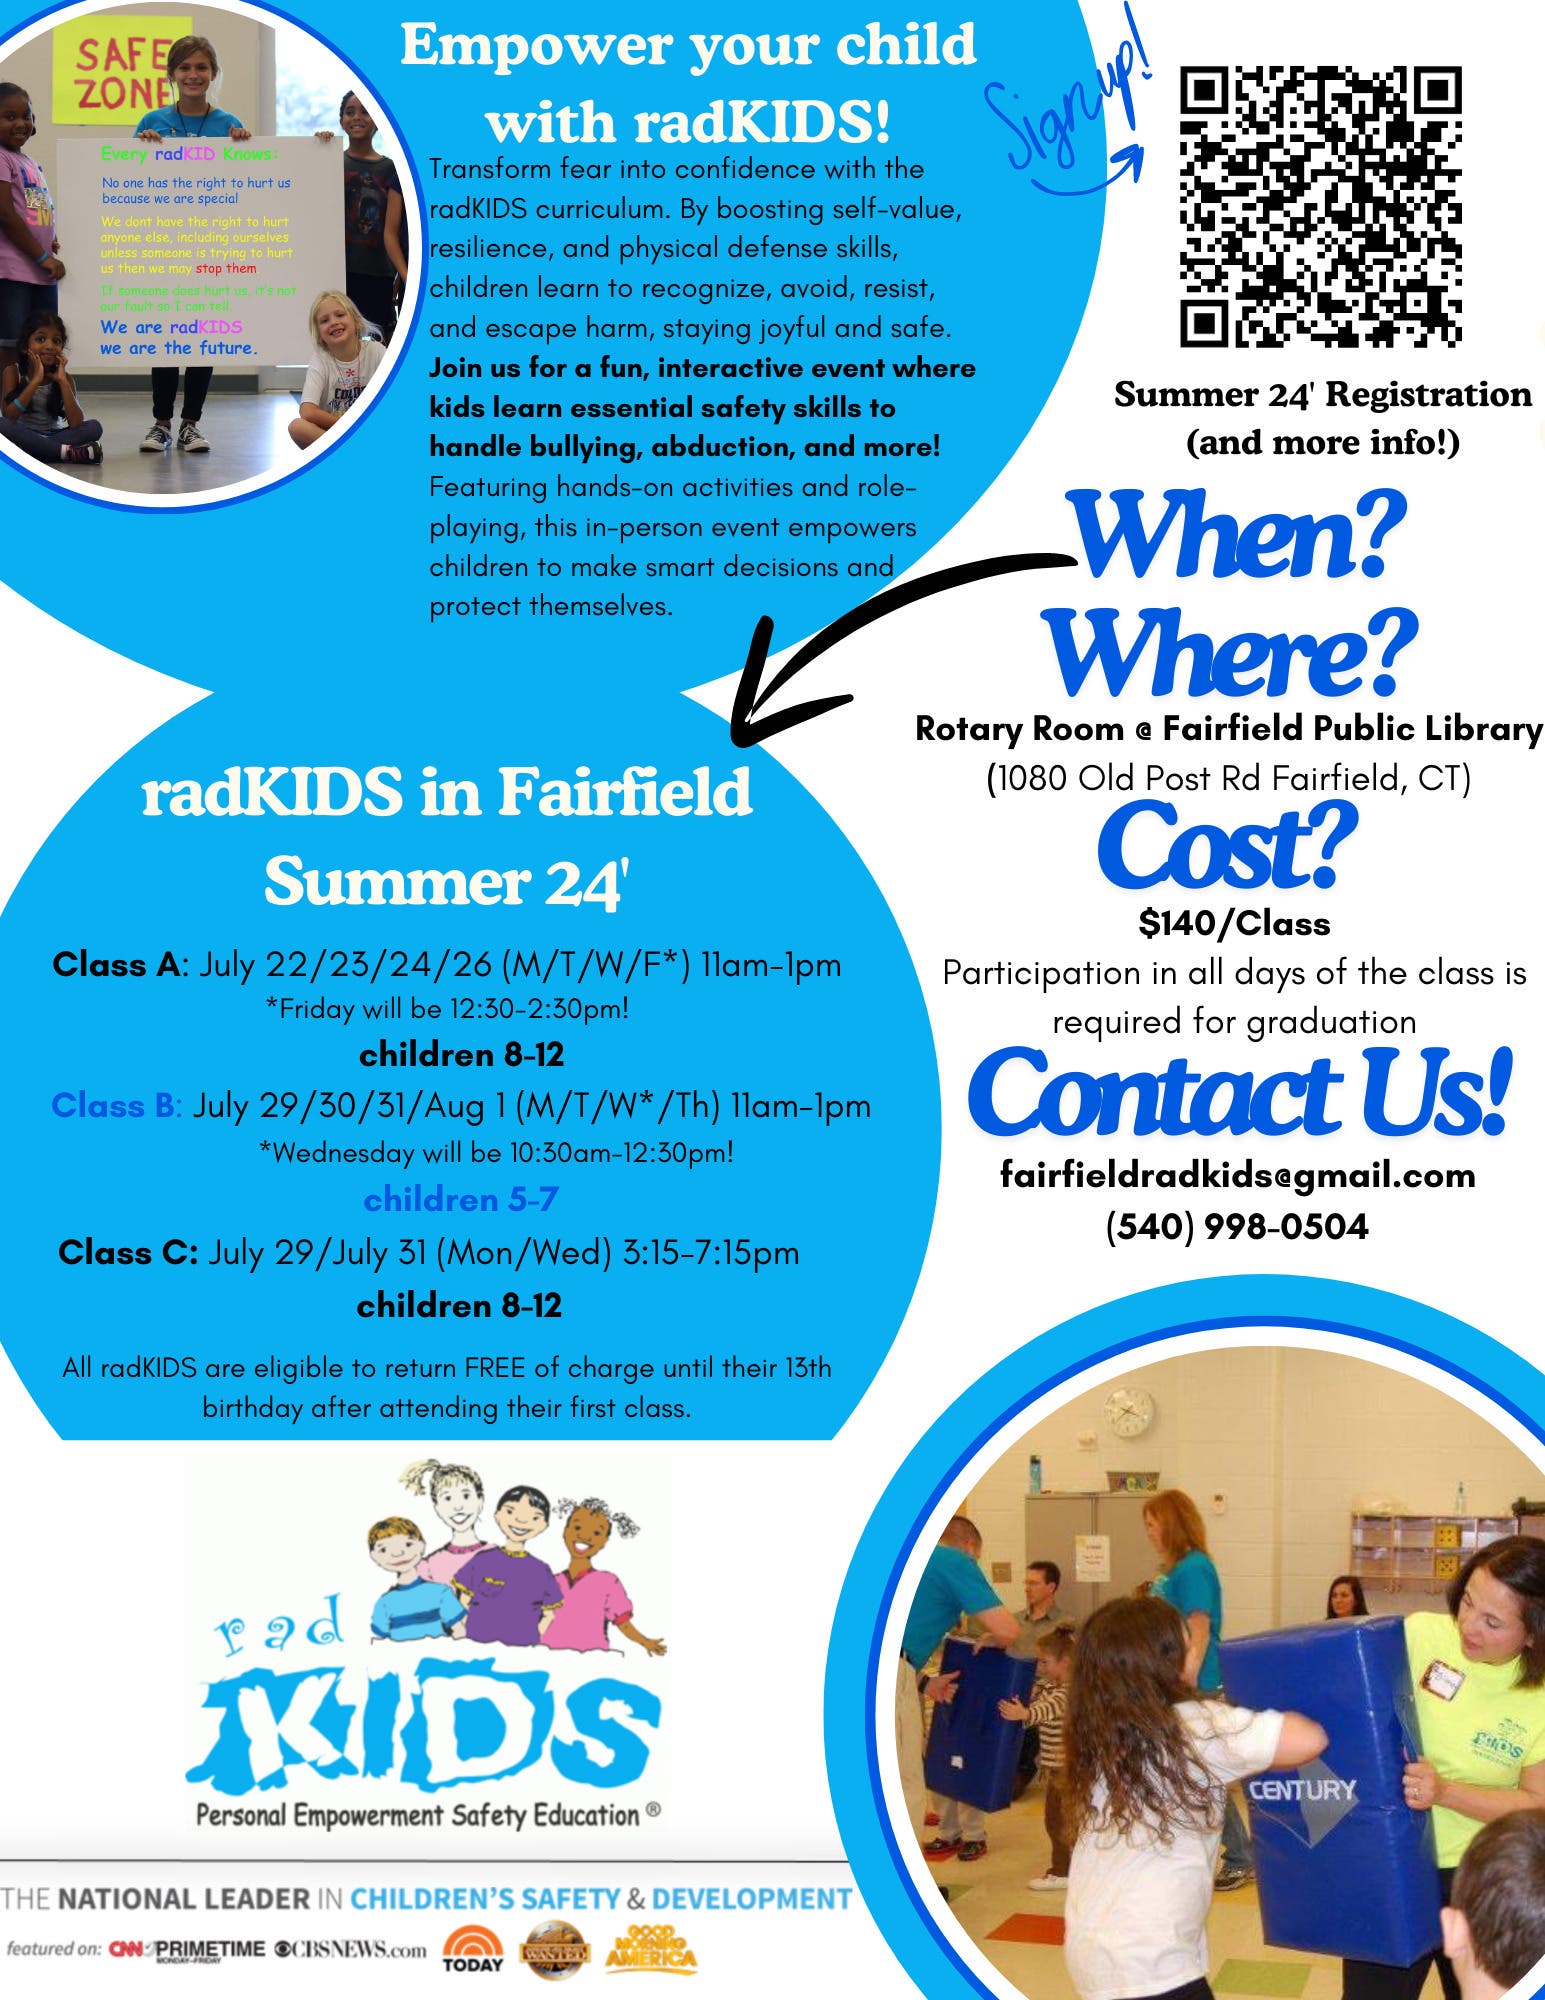 Fairfield radKIDS! Don't miss this opportunity to equip your child with important life skills!